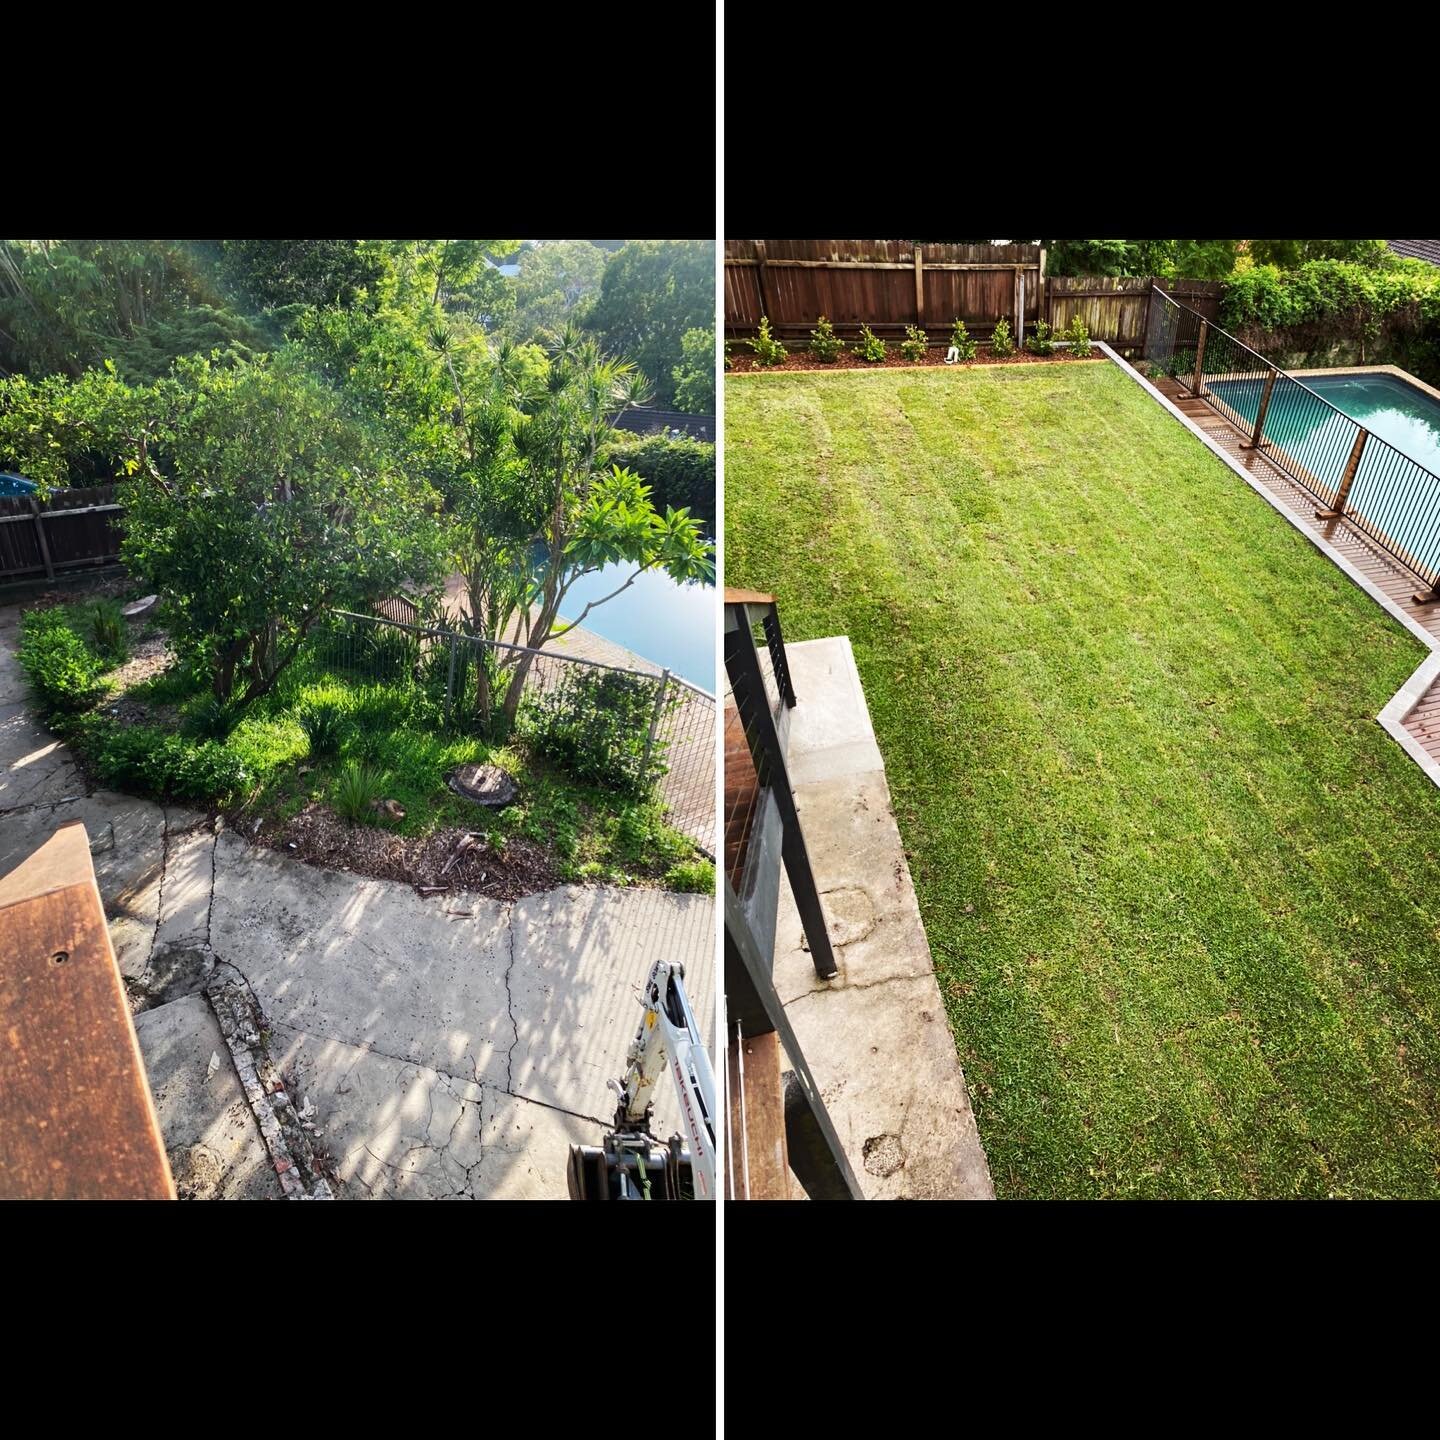 Before | After
Re-levelling and new turf area - we transformed this impractical area into a safe backyard for the young family to enjoy #beyondthegate #beyondthegatelandscaping #sydneylandscaper #transformation #gardentransformation #backyardtransfor